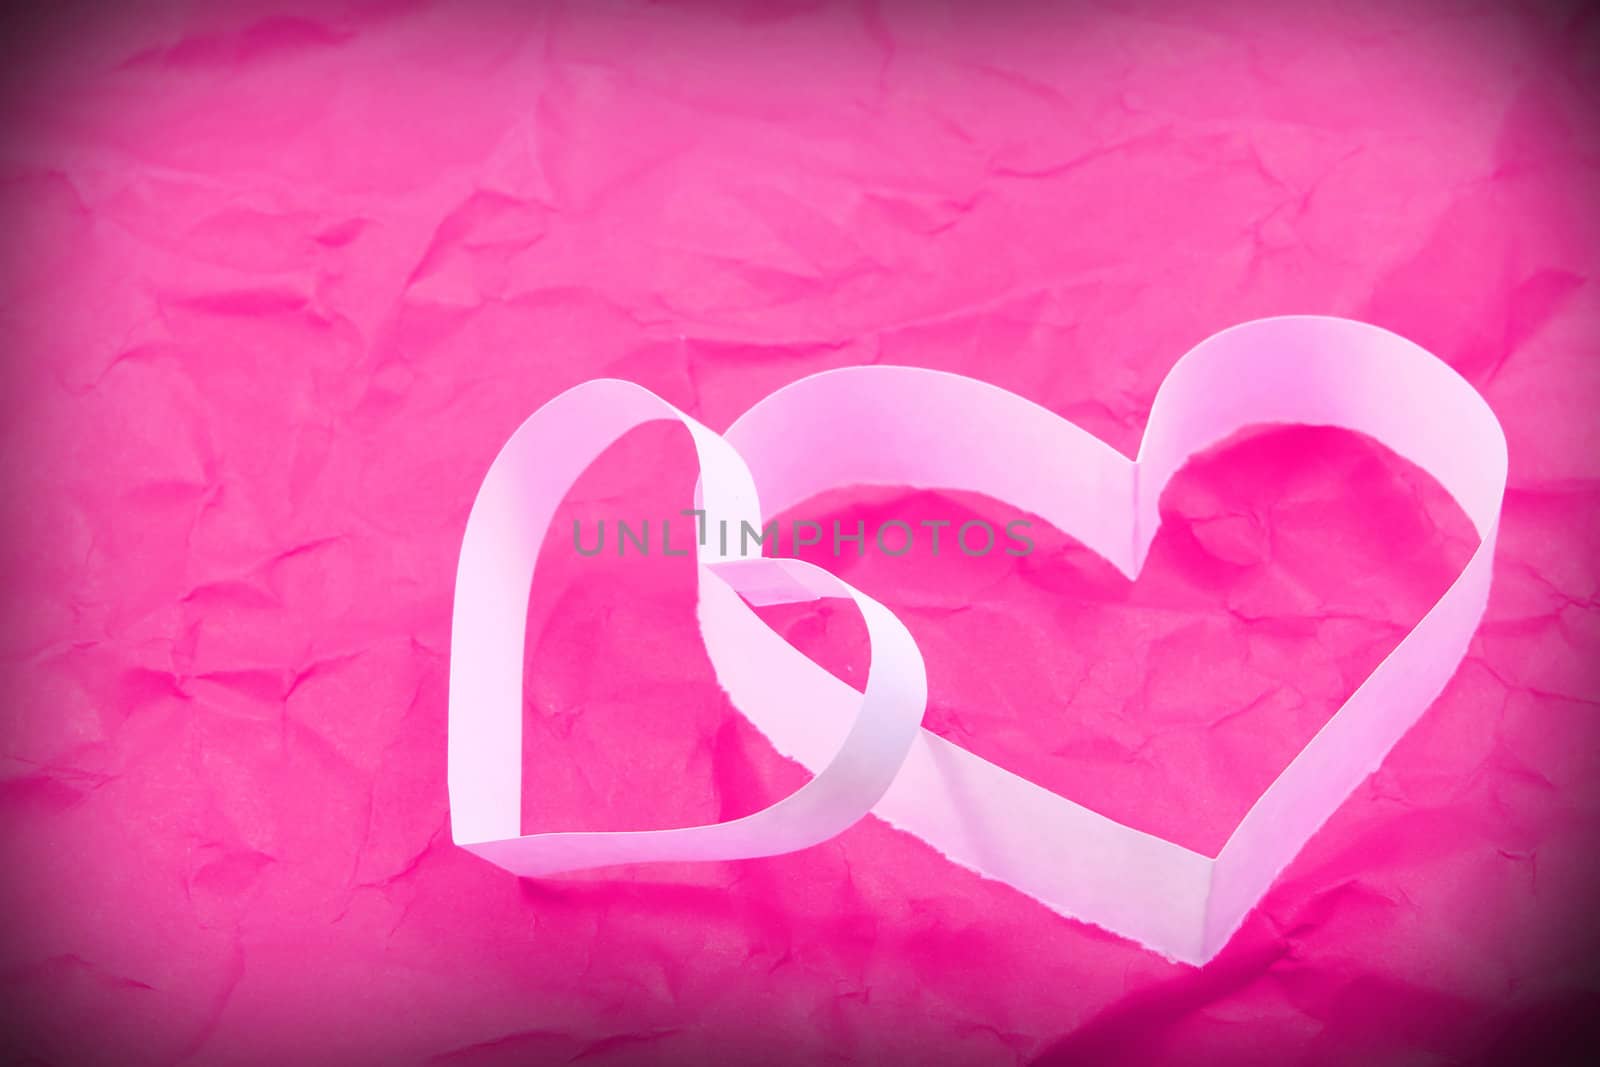 Paper hearts on pink background